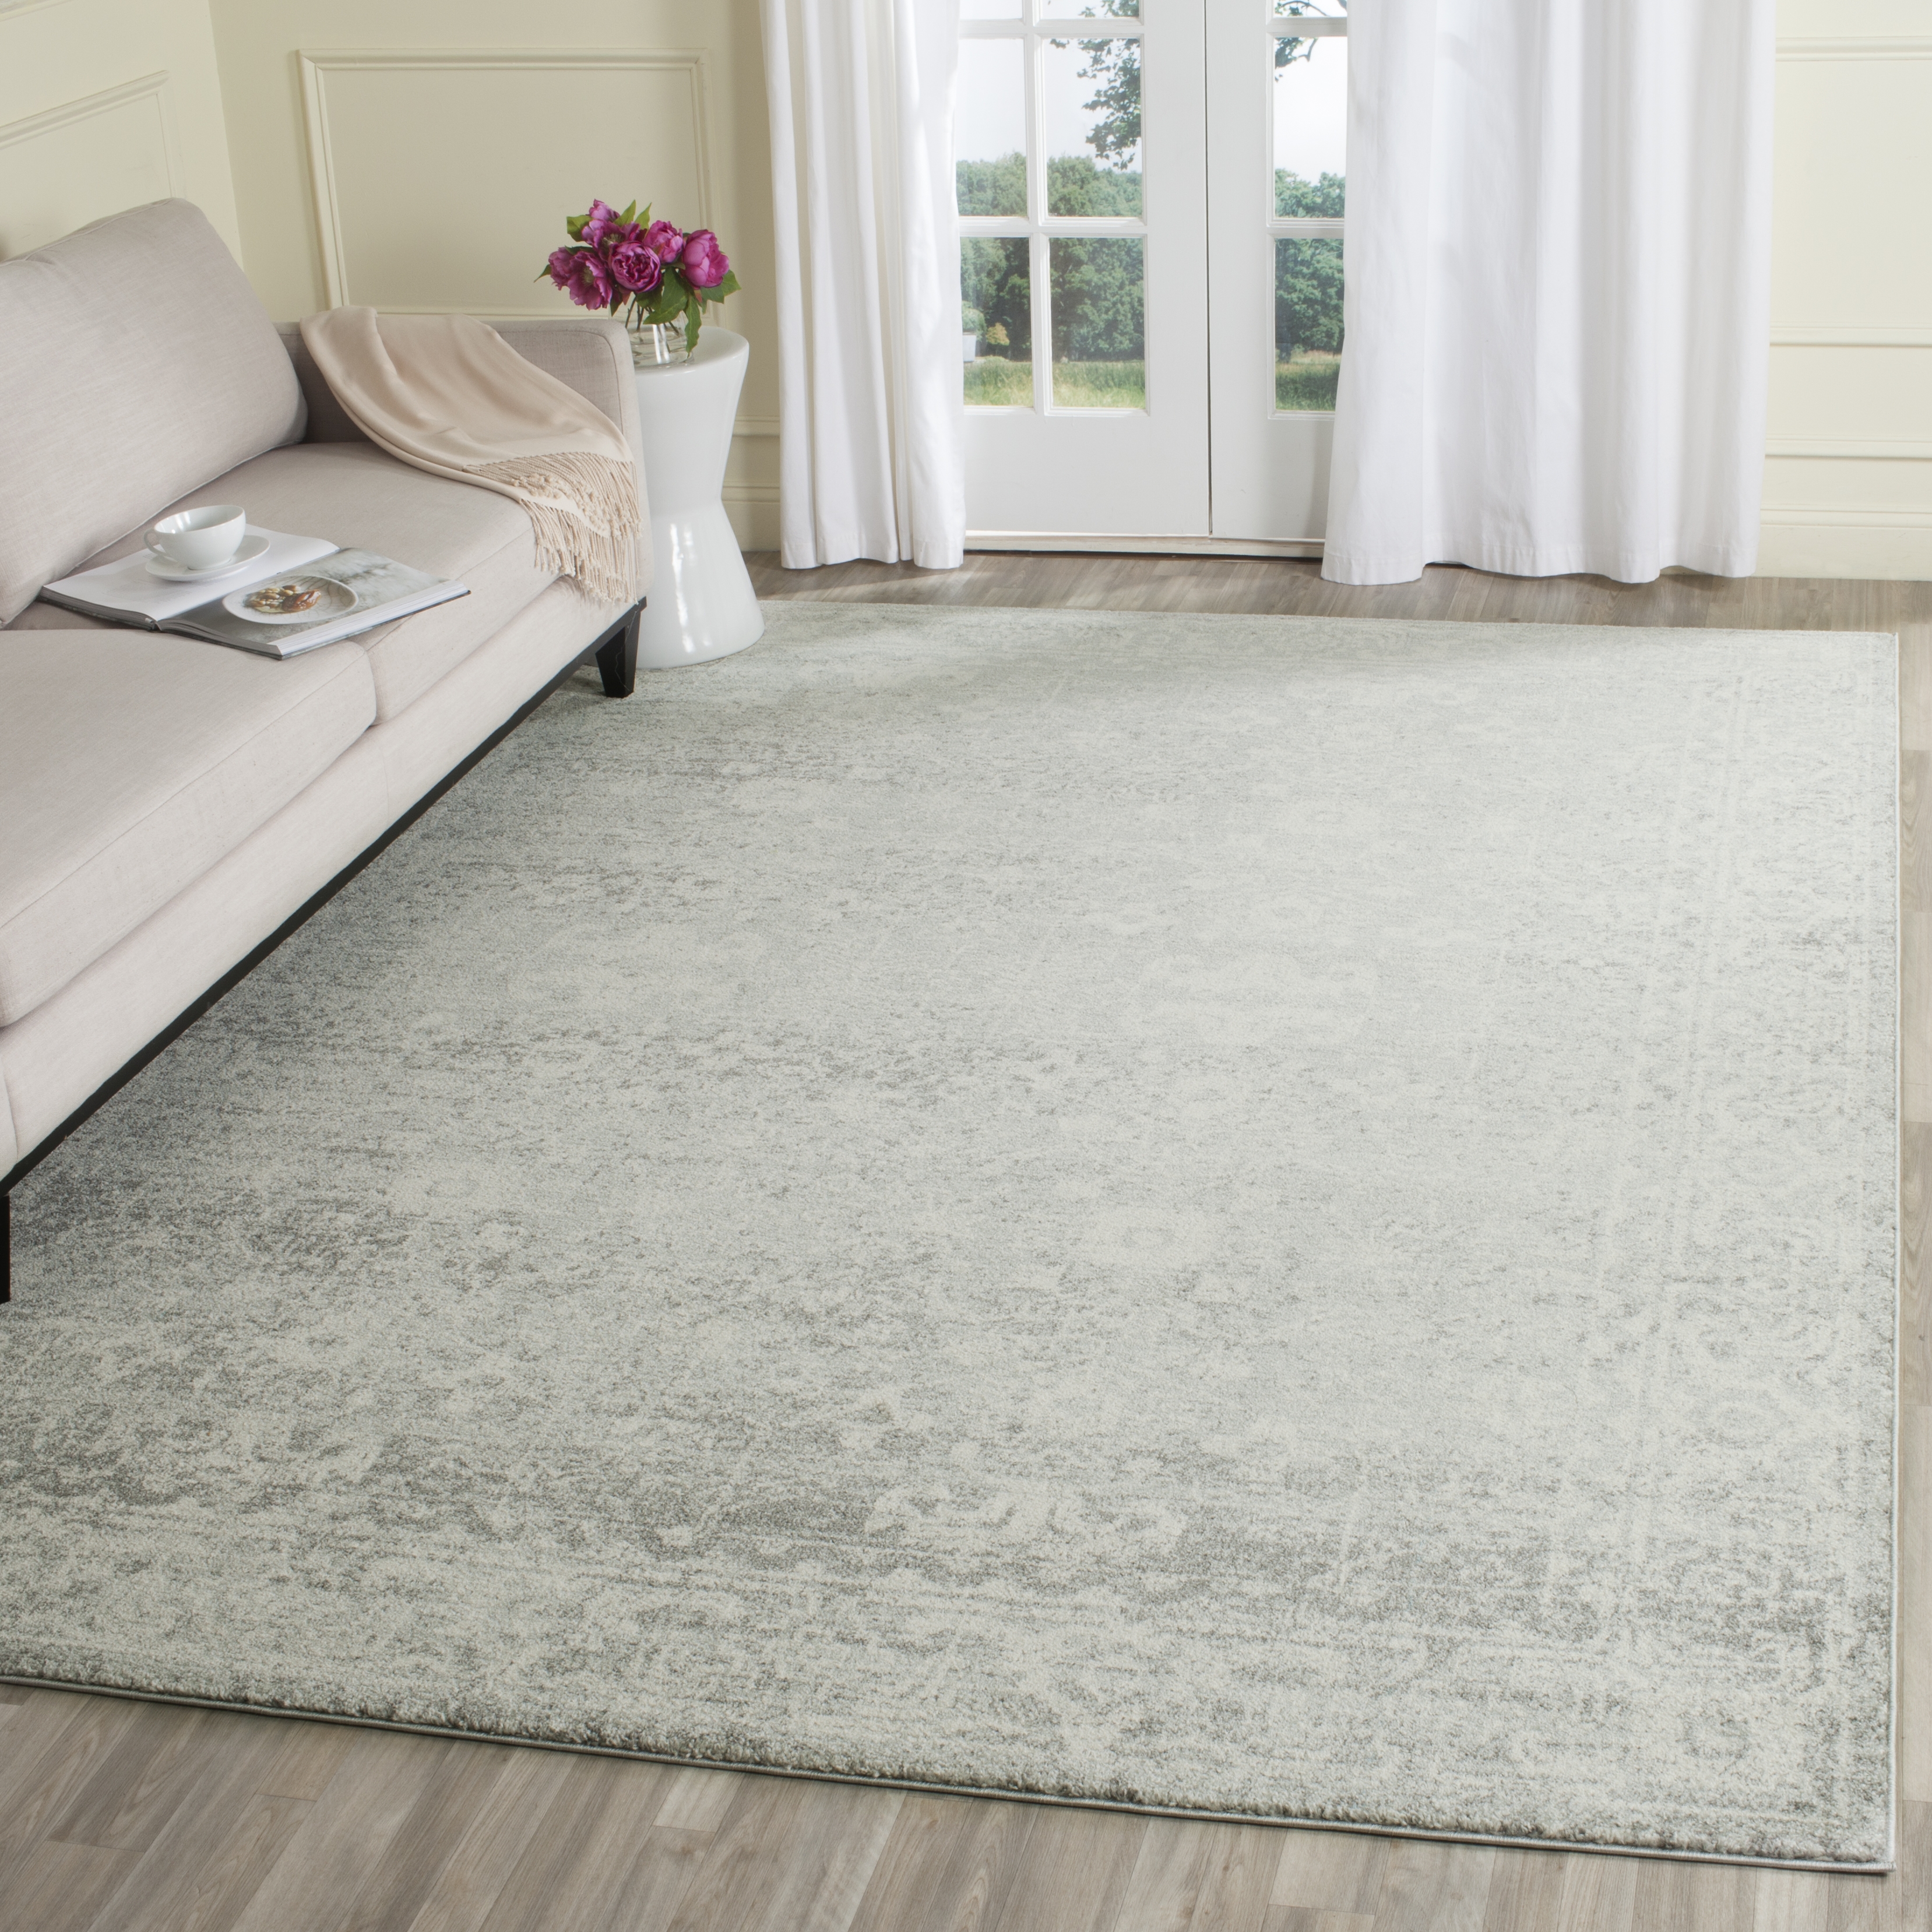 Arlo Home Woven Area Rug, EVK270Z, Silver/Ivory,  10' X 14' - Image 1